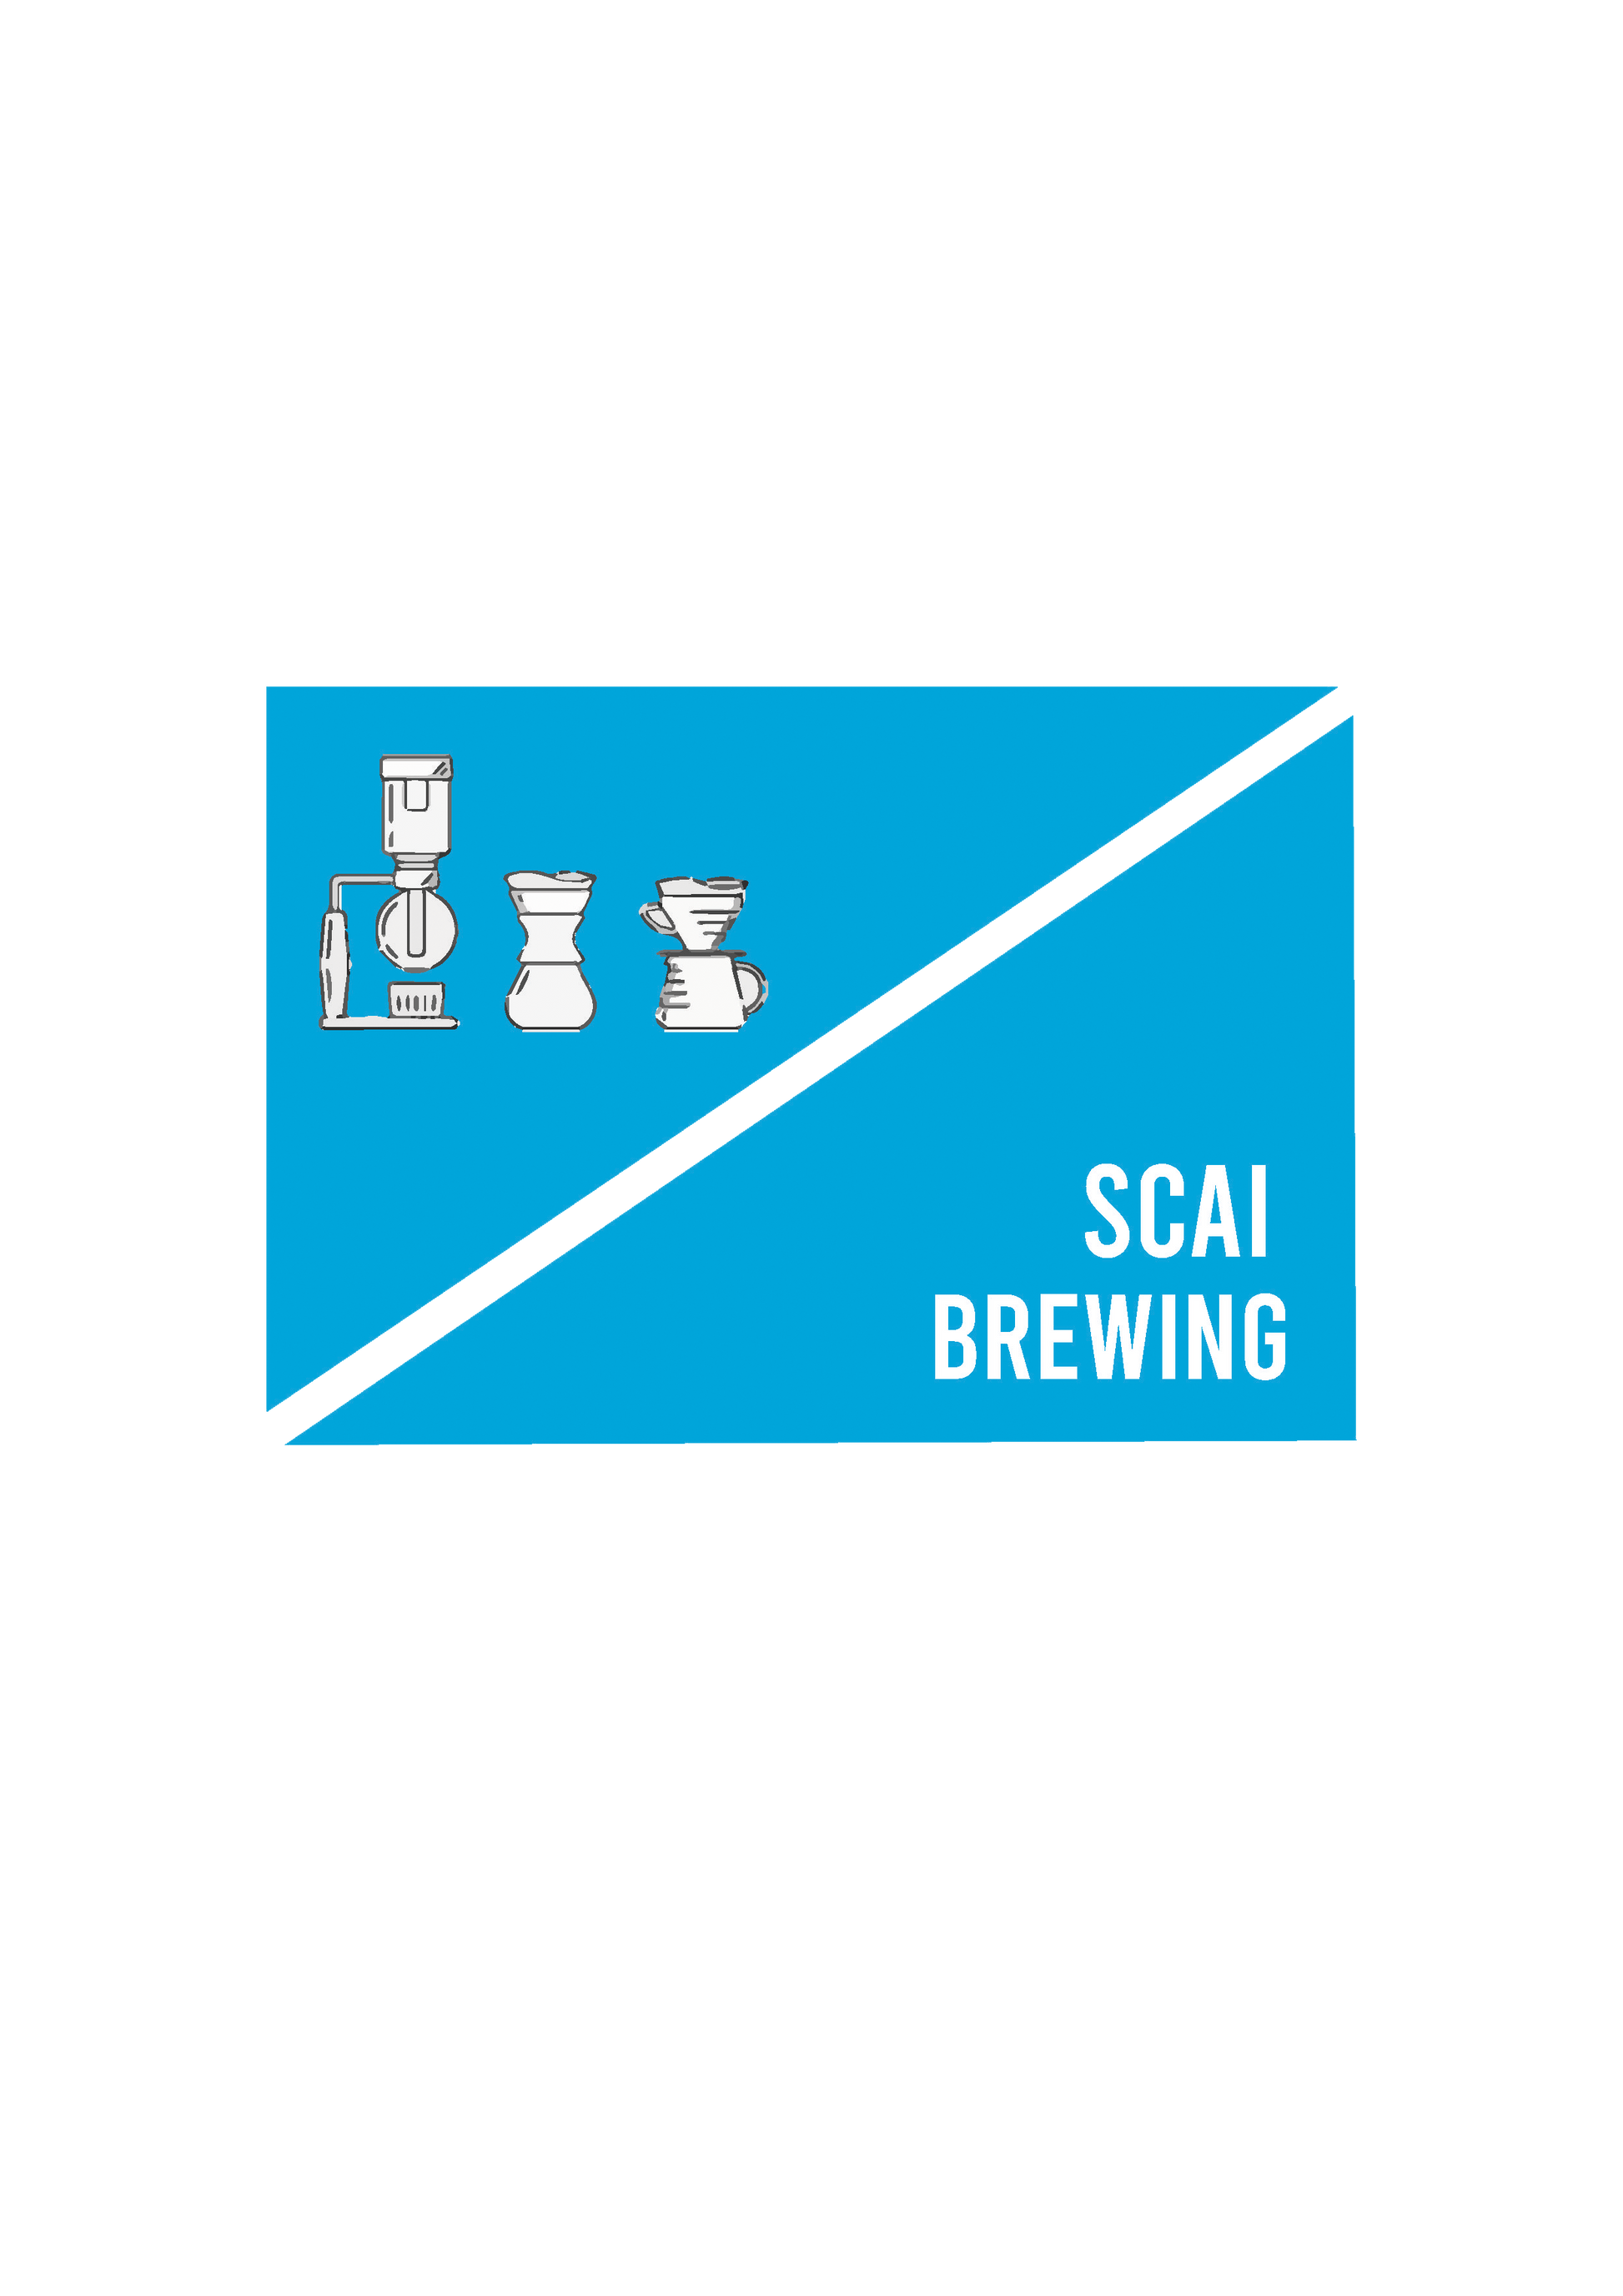 Brewing workshop conducted by SCAI to address brewing 101